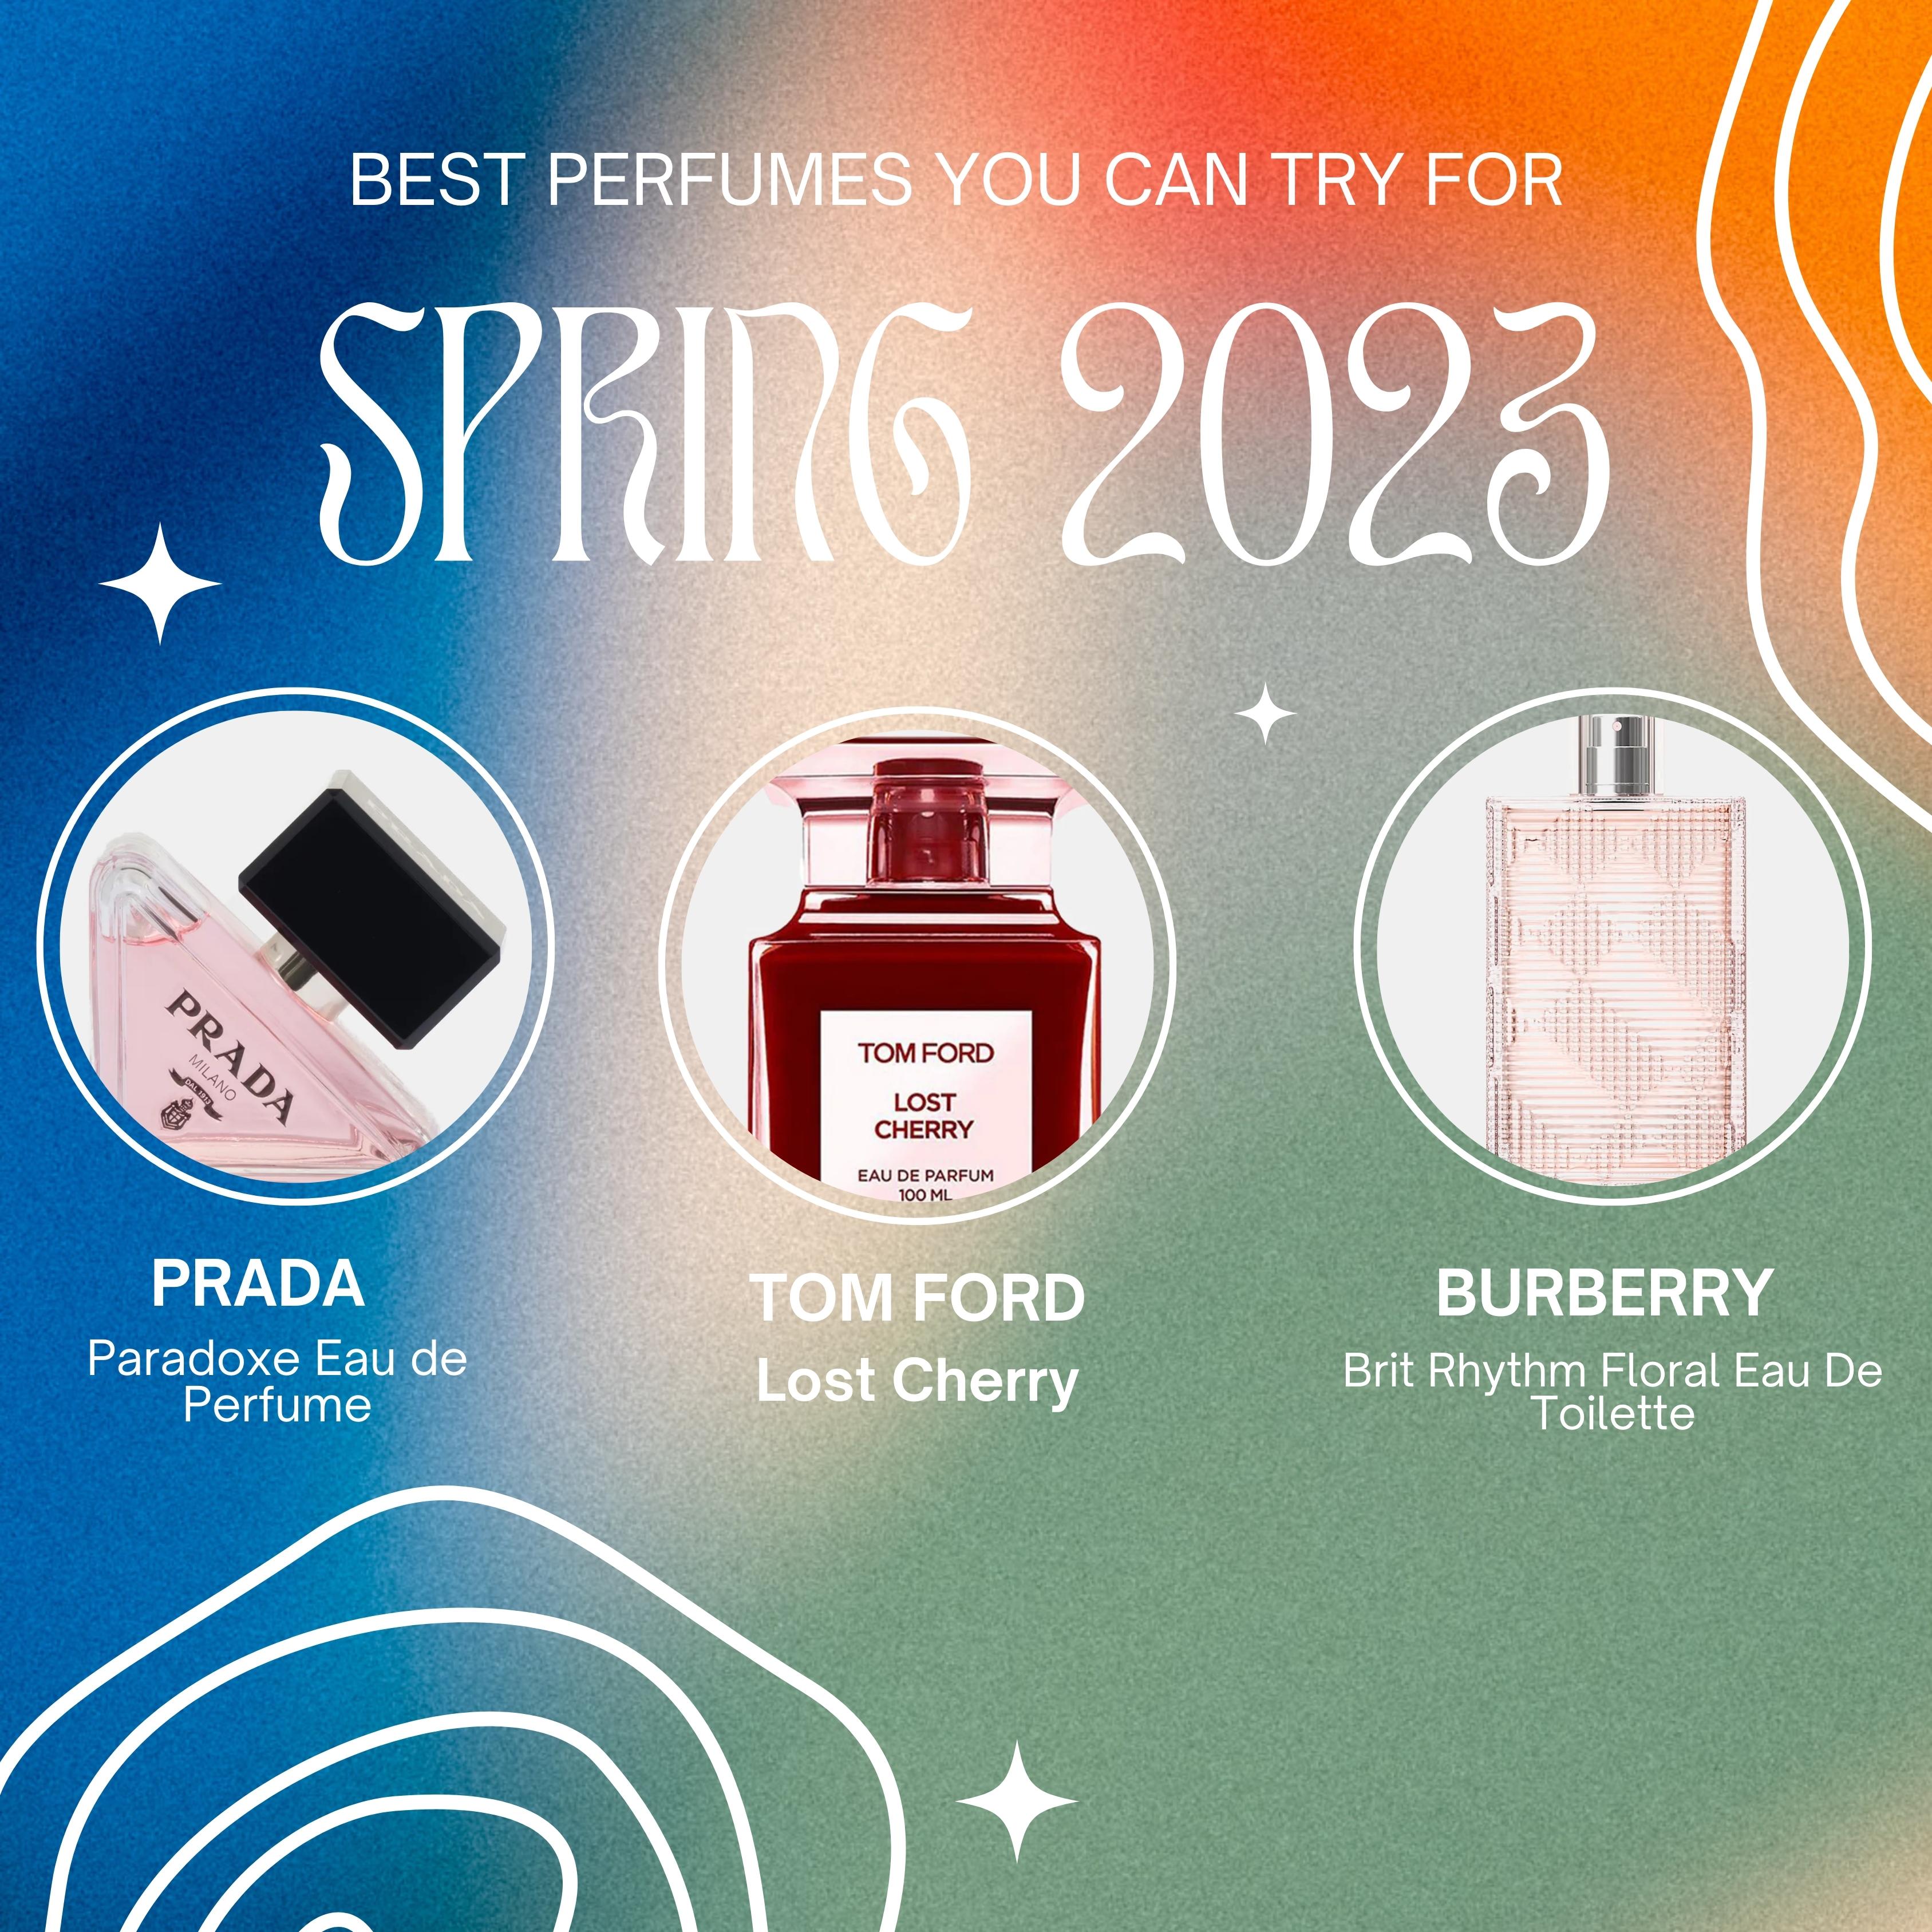 Best Perfumes You Can Try for Spring 2023